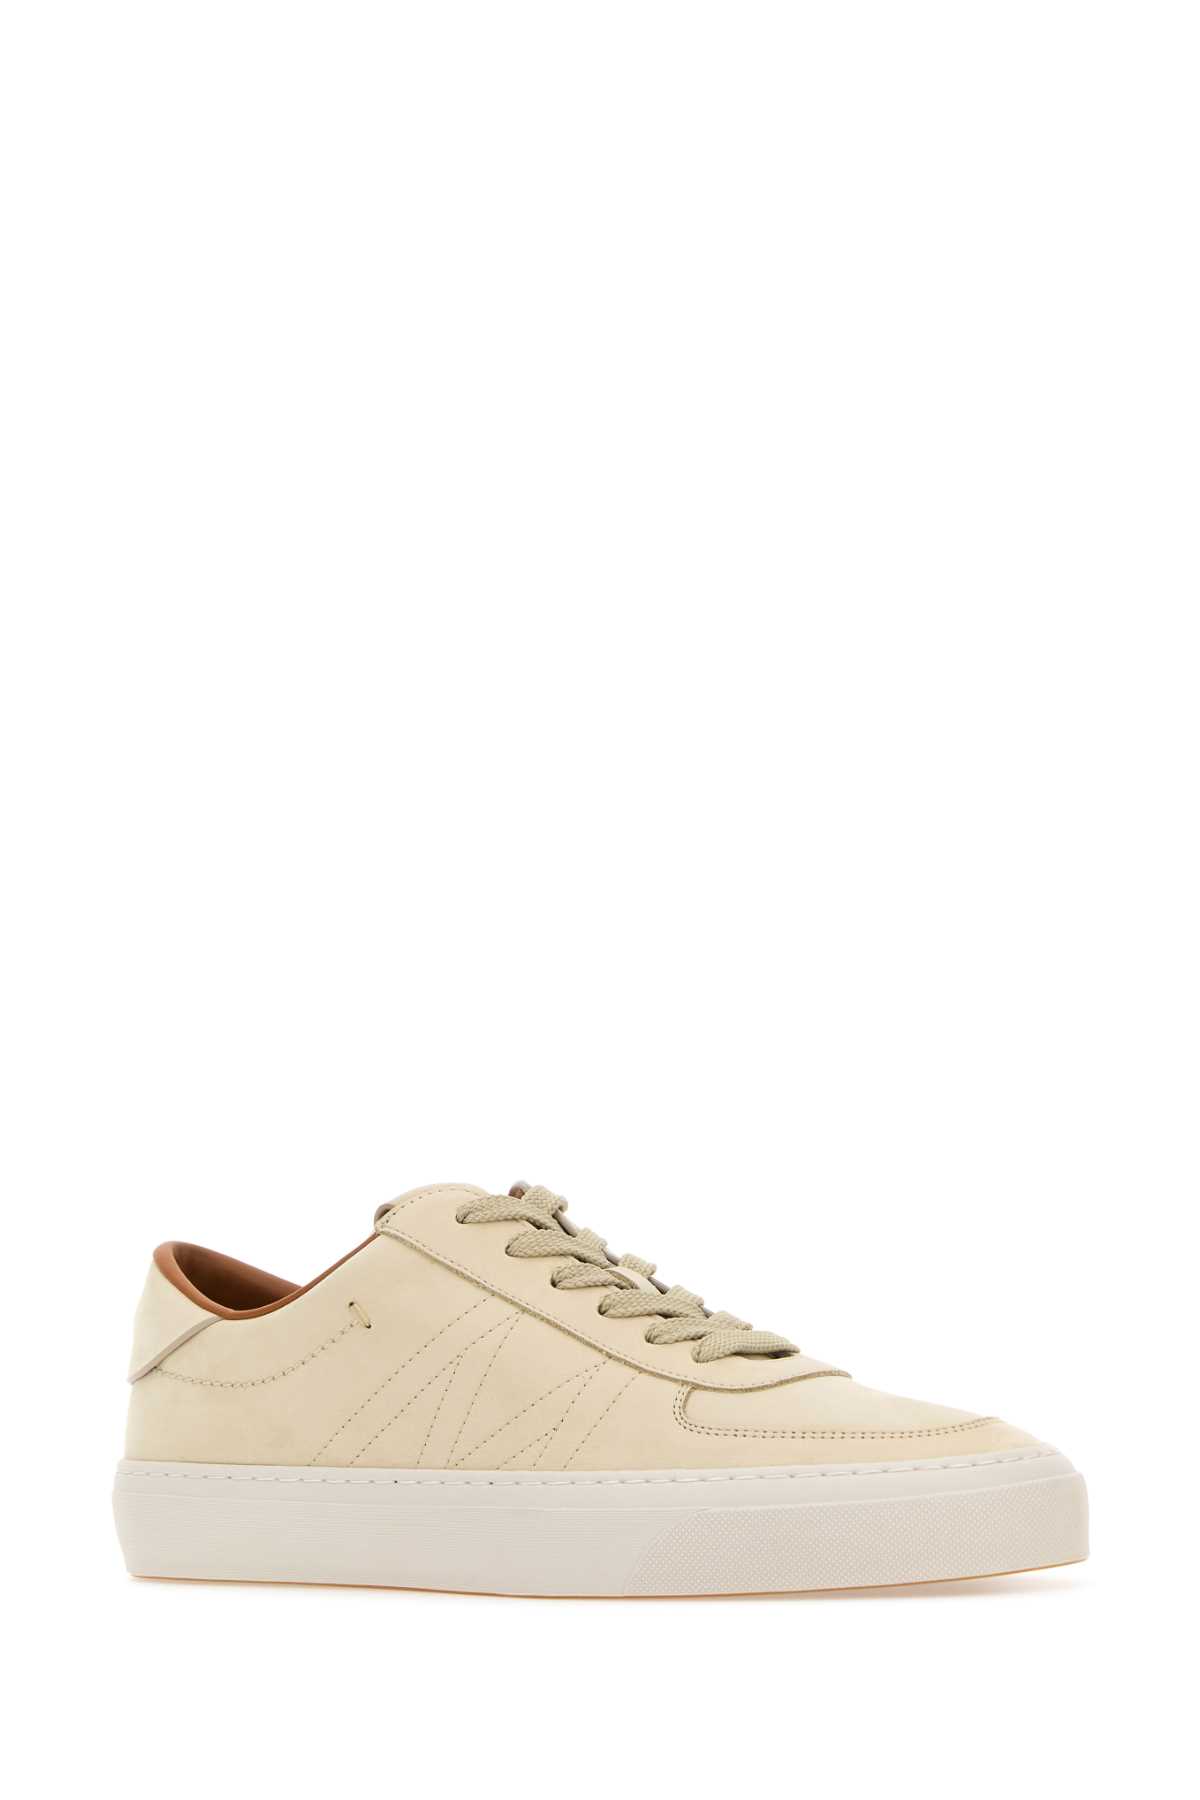 Moncler Sand Leather Monclub Sneakers In 20f